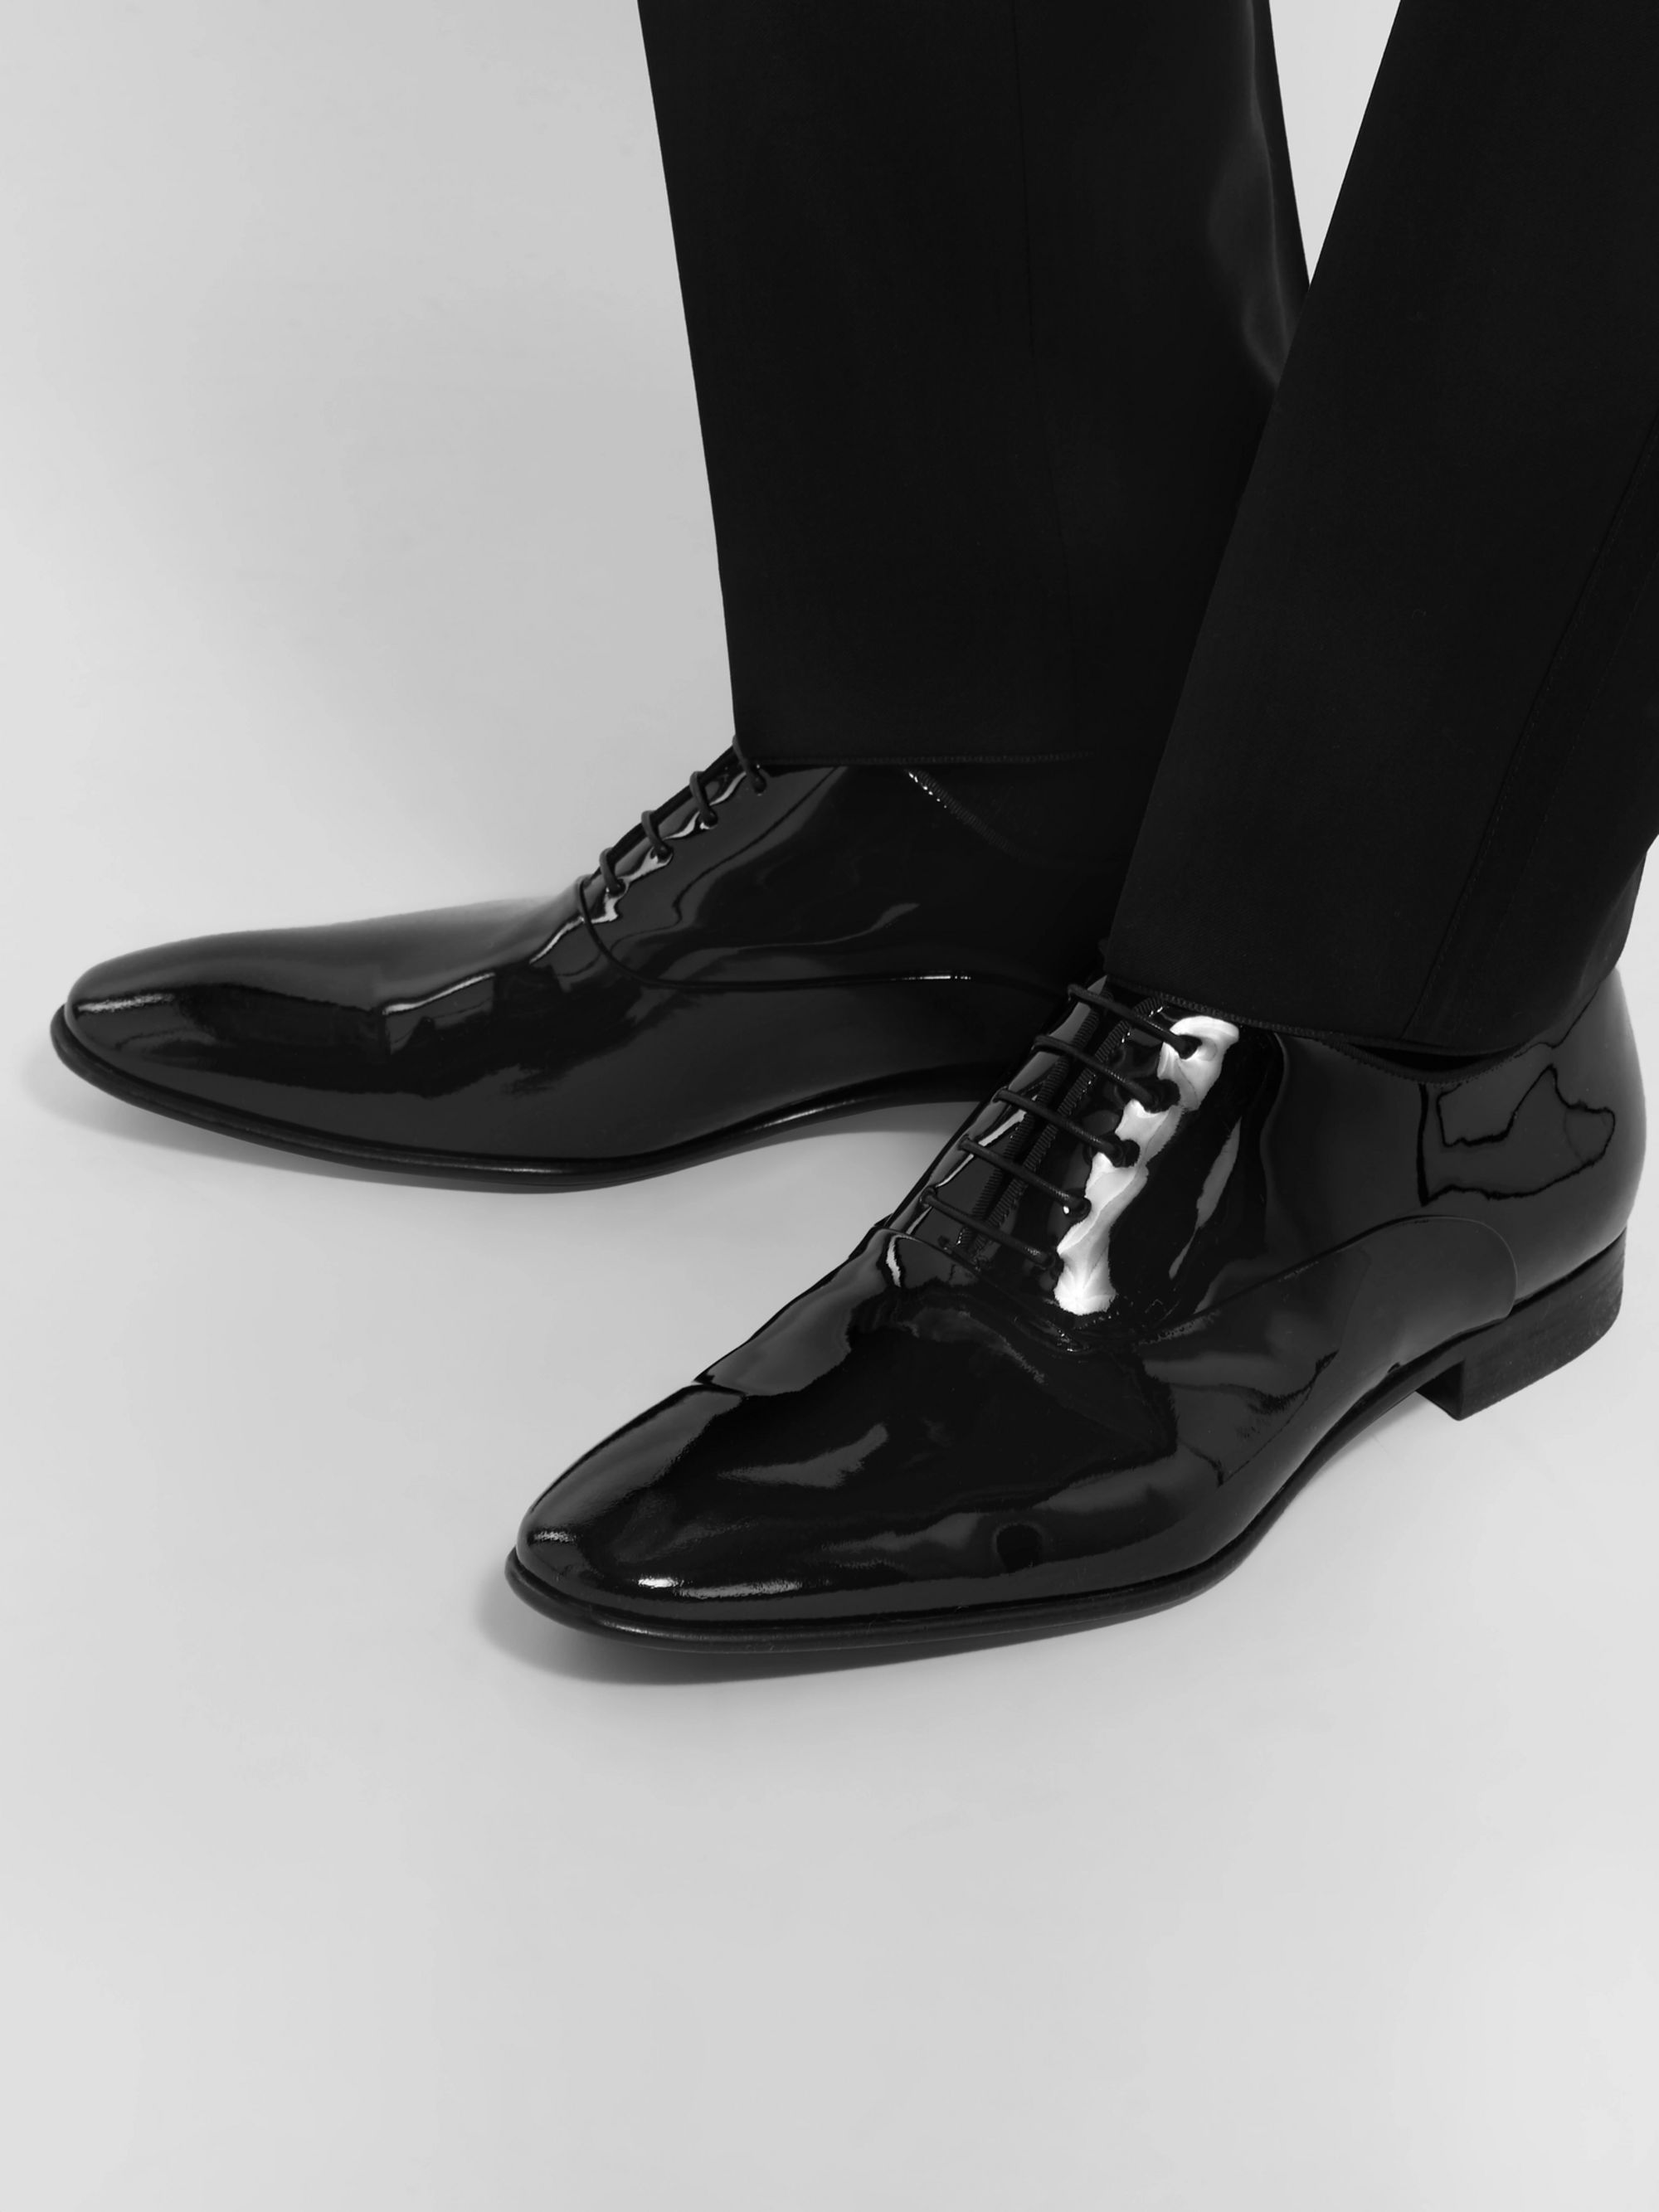 Black Patent-Leather Oxford Shoes 